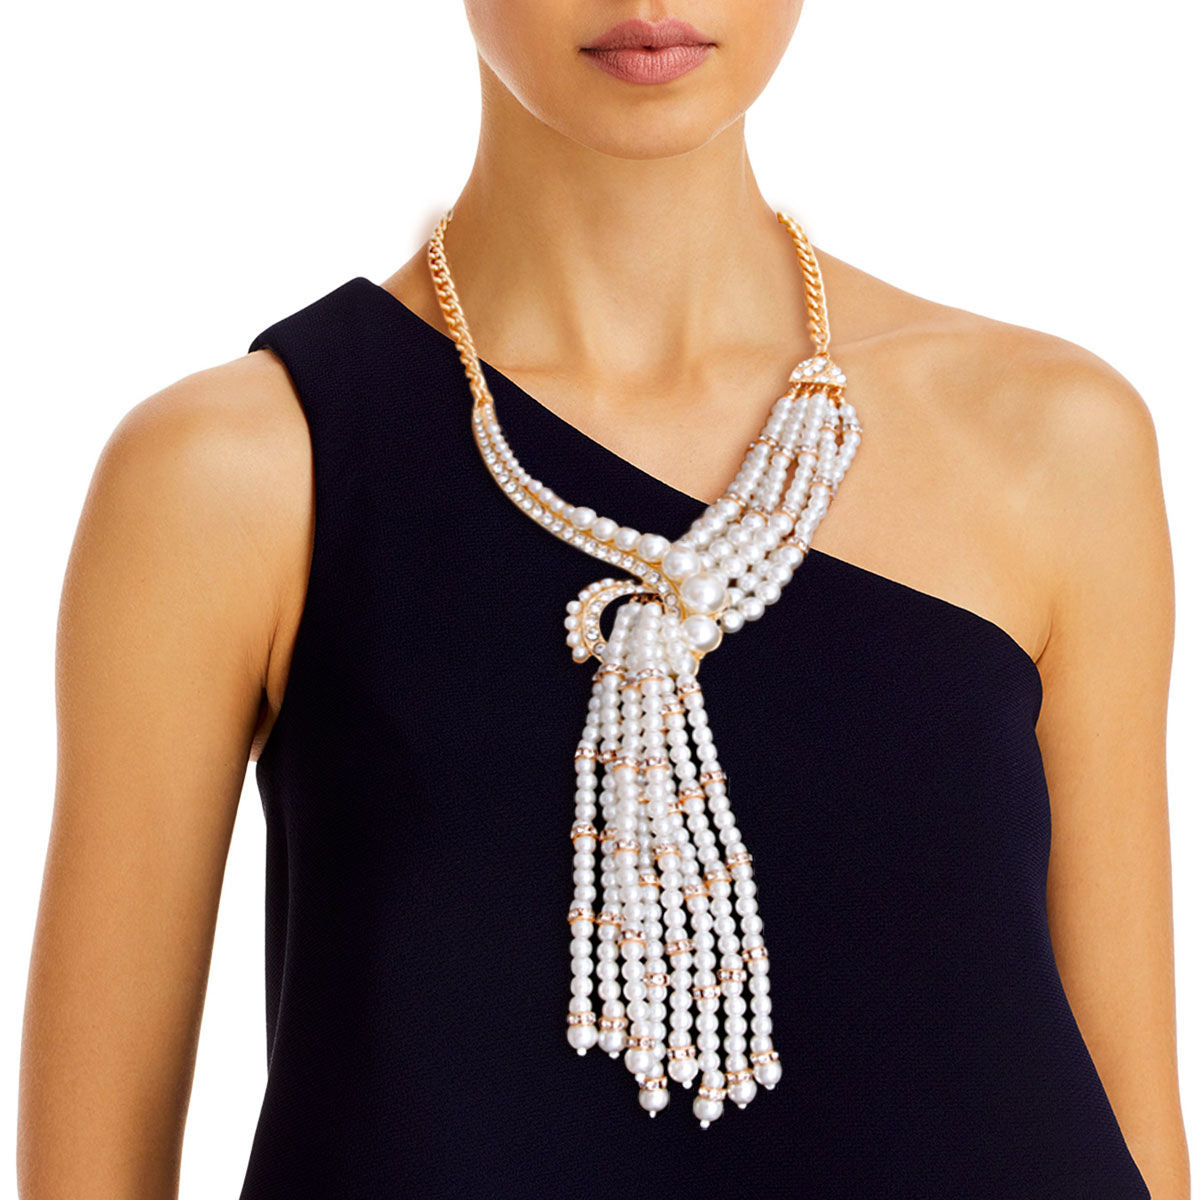 Asymmetric Pearl and Rhinestone Knot Necklace Set